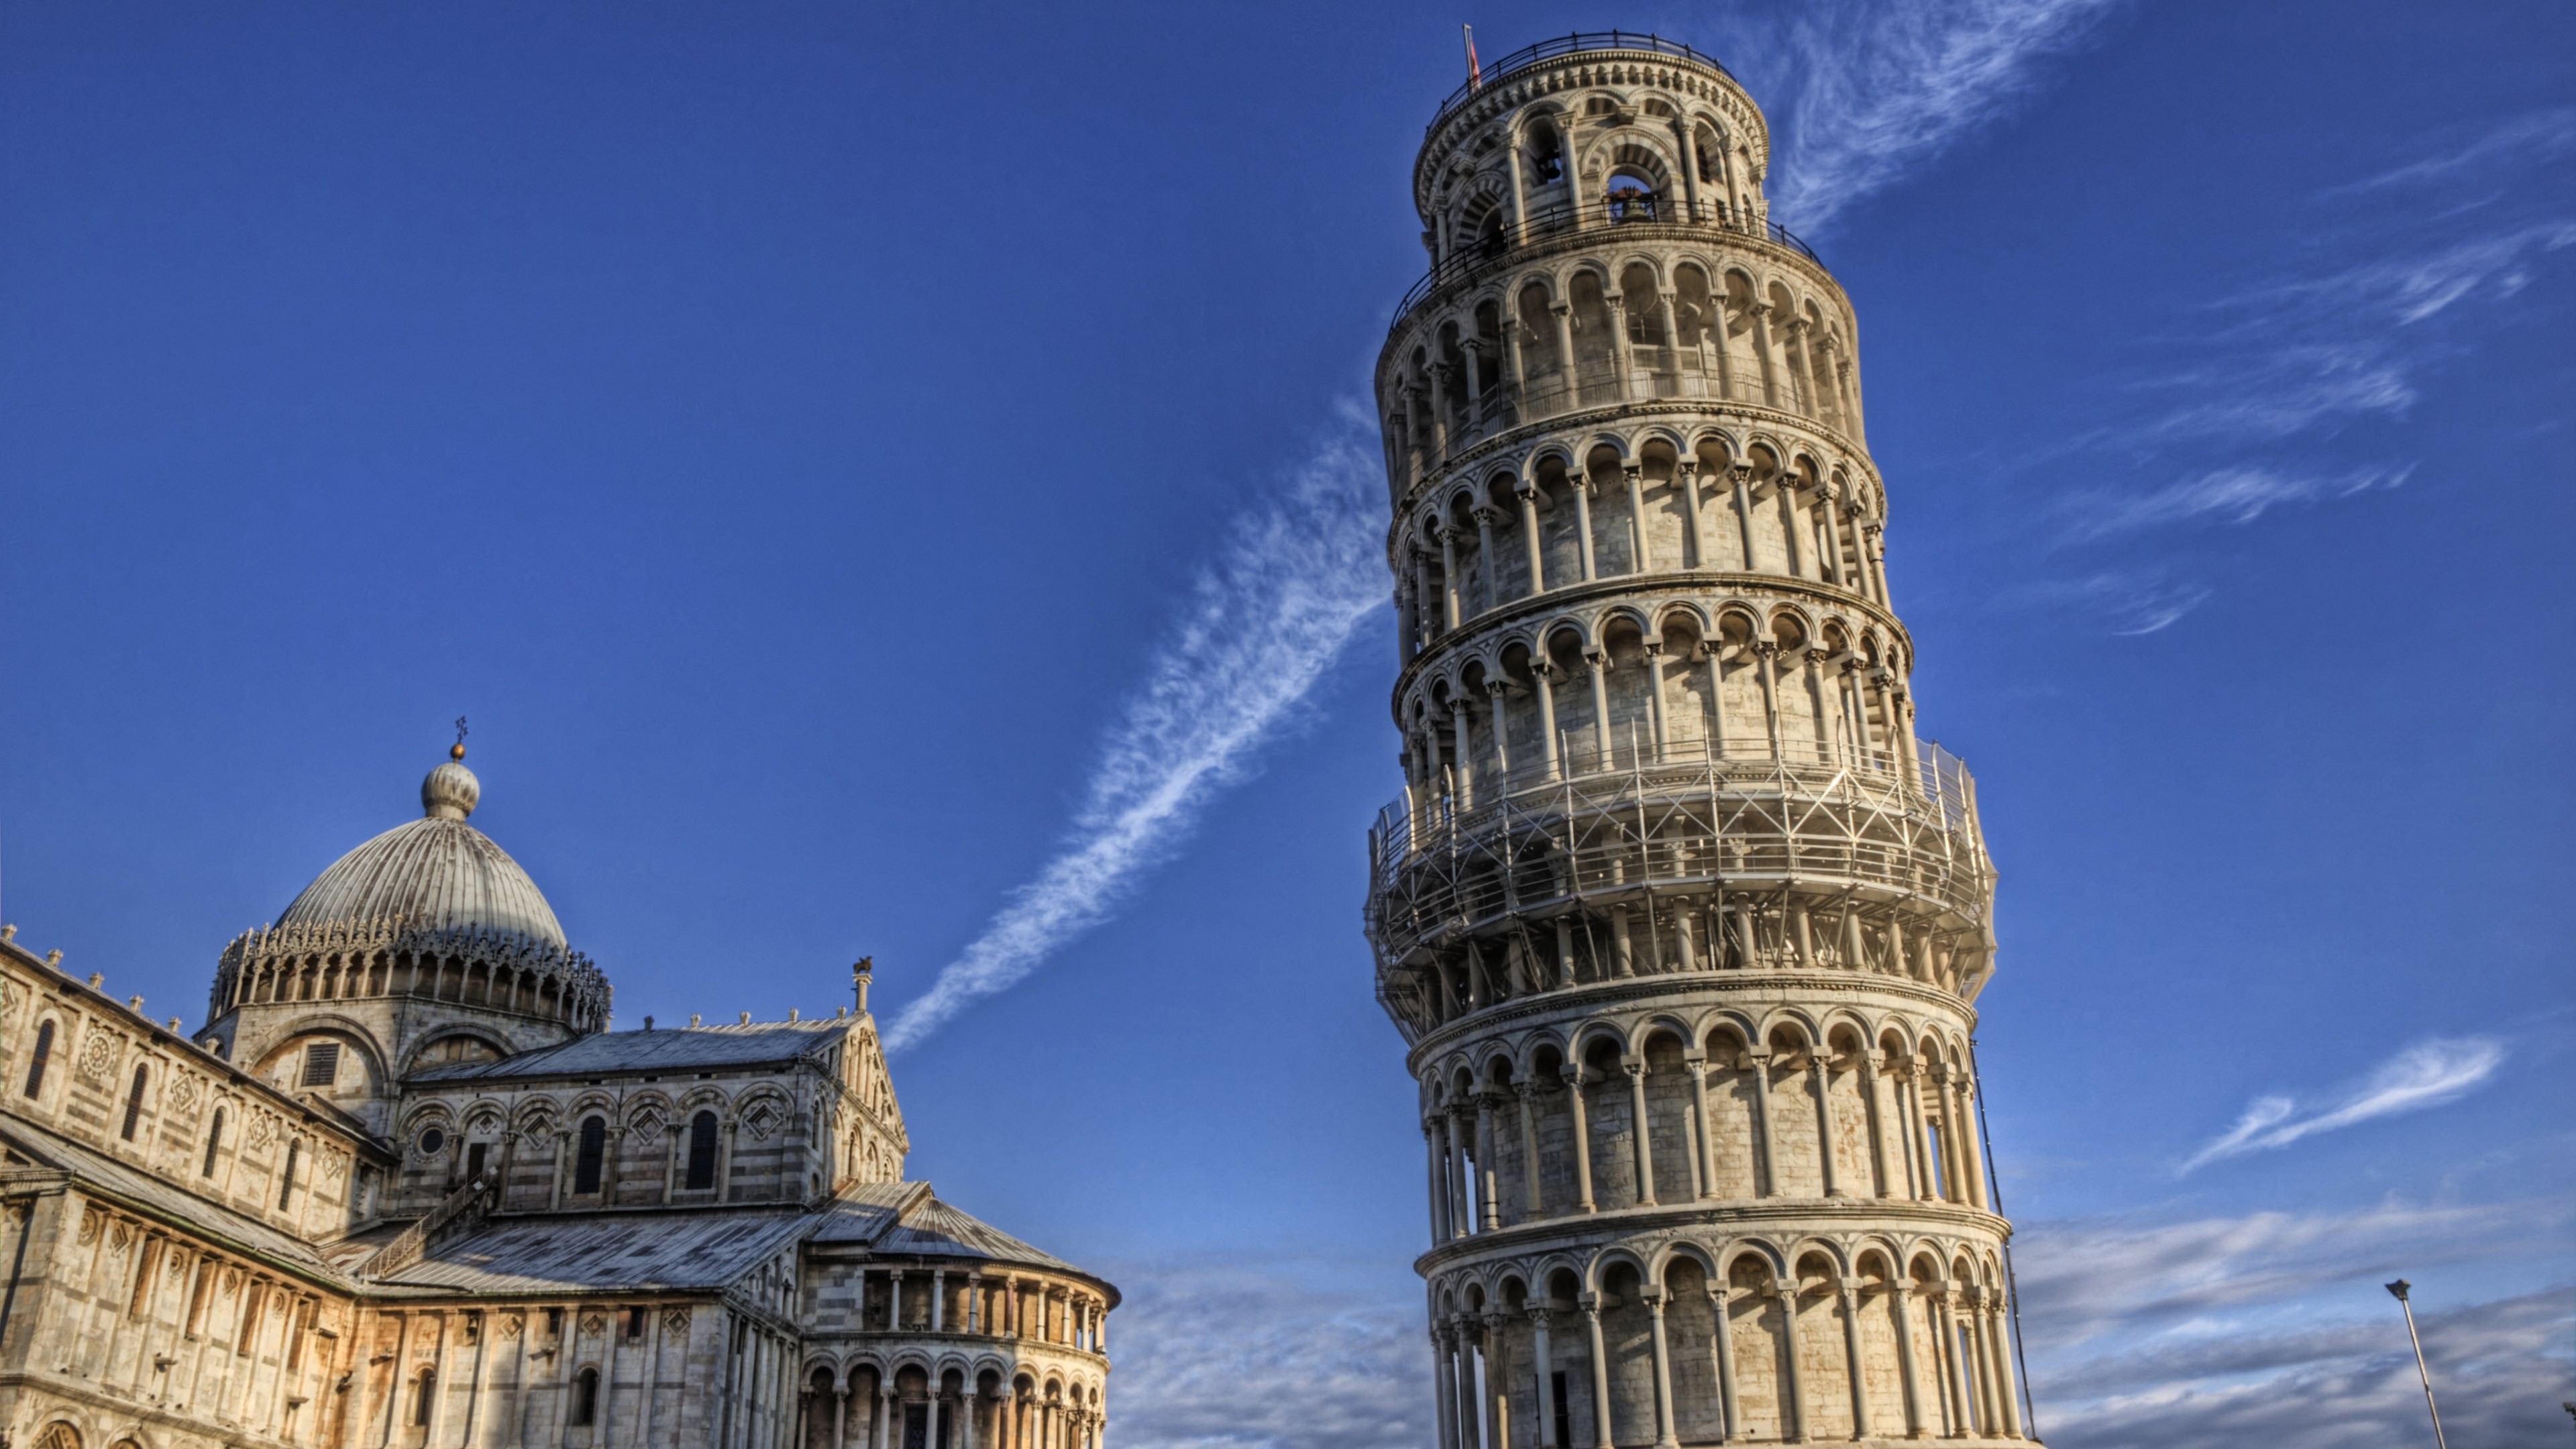 Italy Building Leaning Tower Of Pisa Architecture 3840x2160